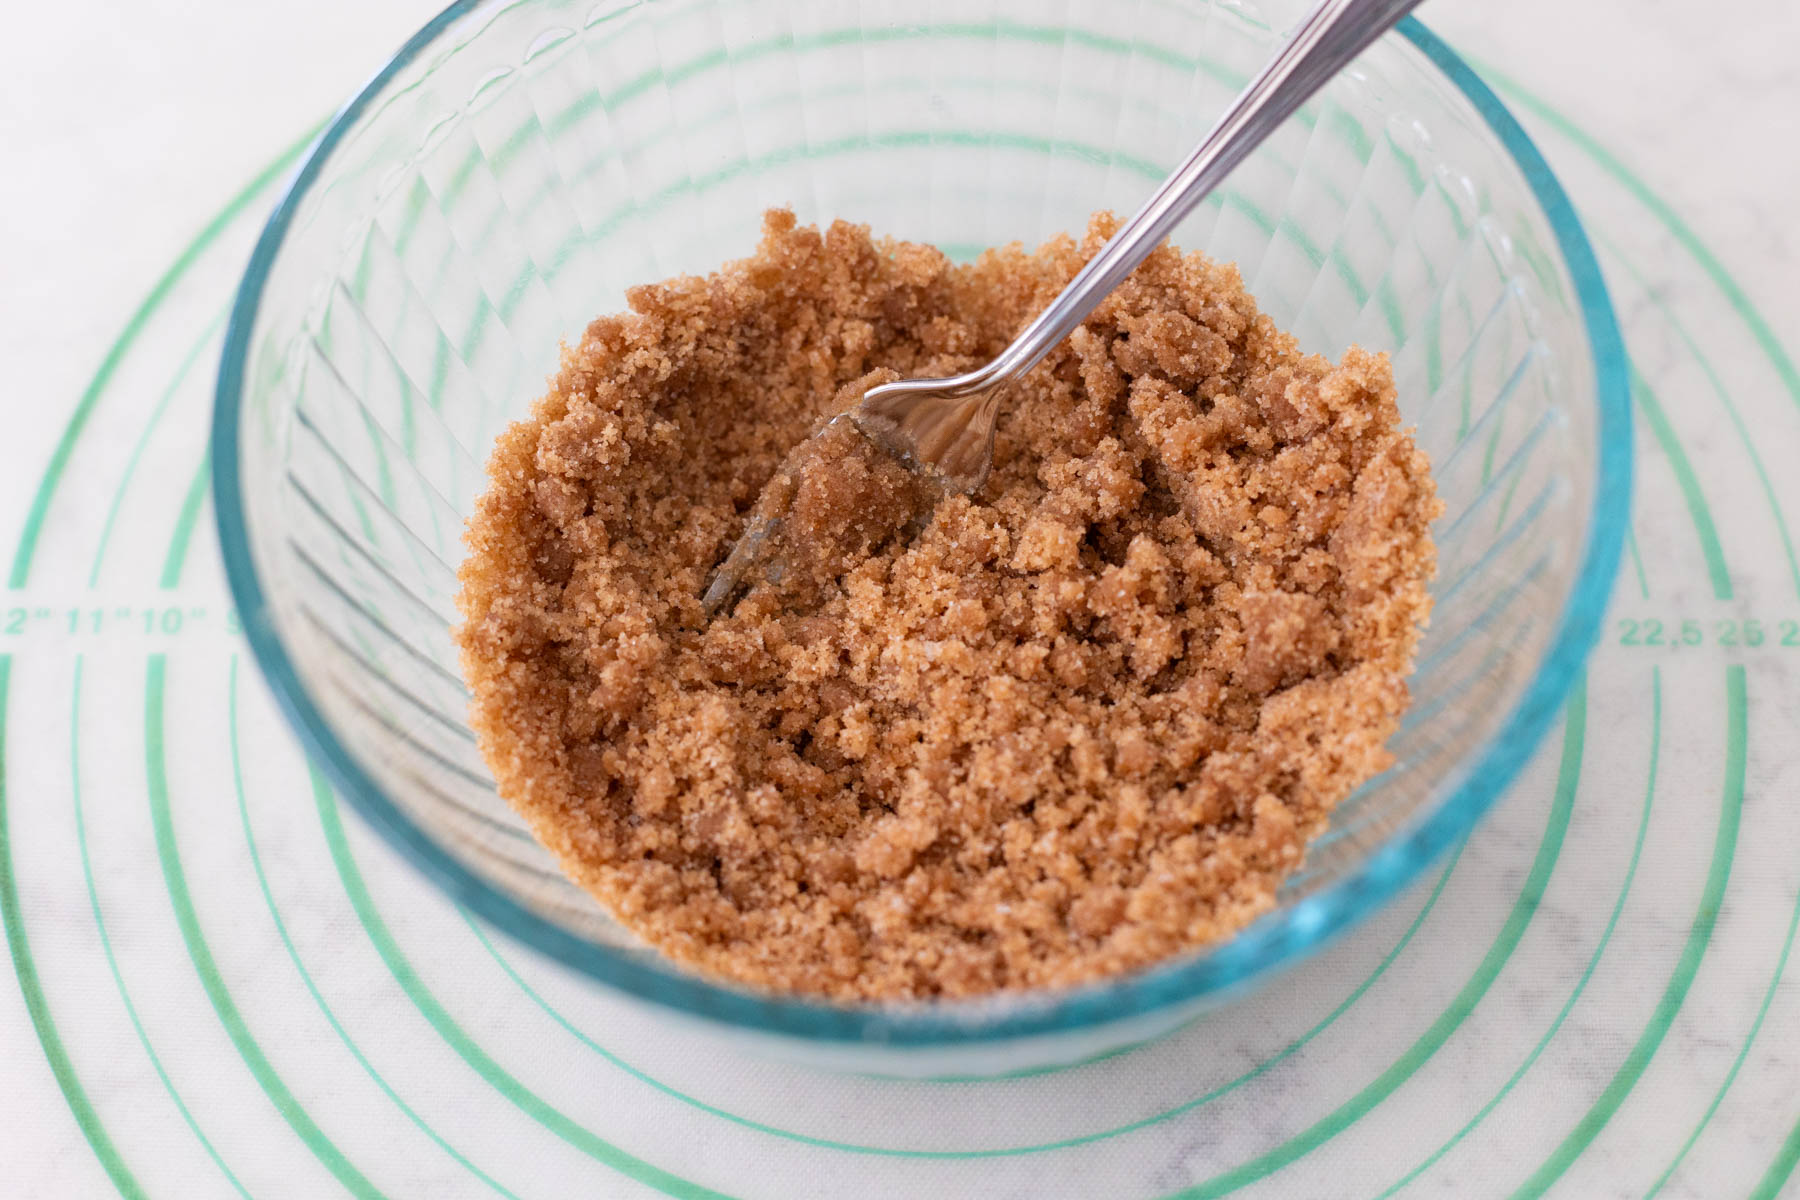 The brown sugar and cinnamon filling has been mixed together in a small mixing bowl.